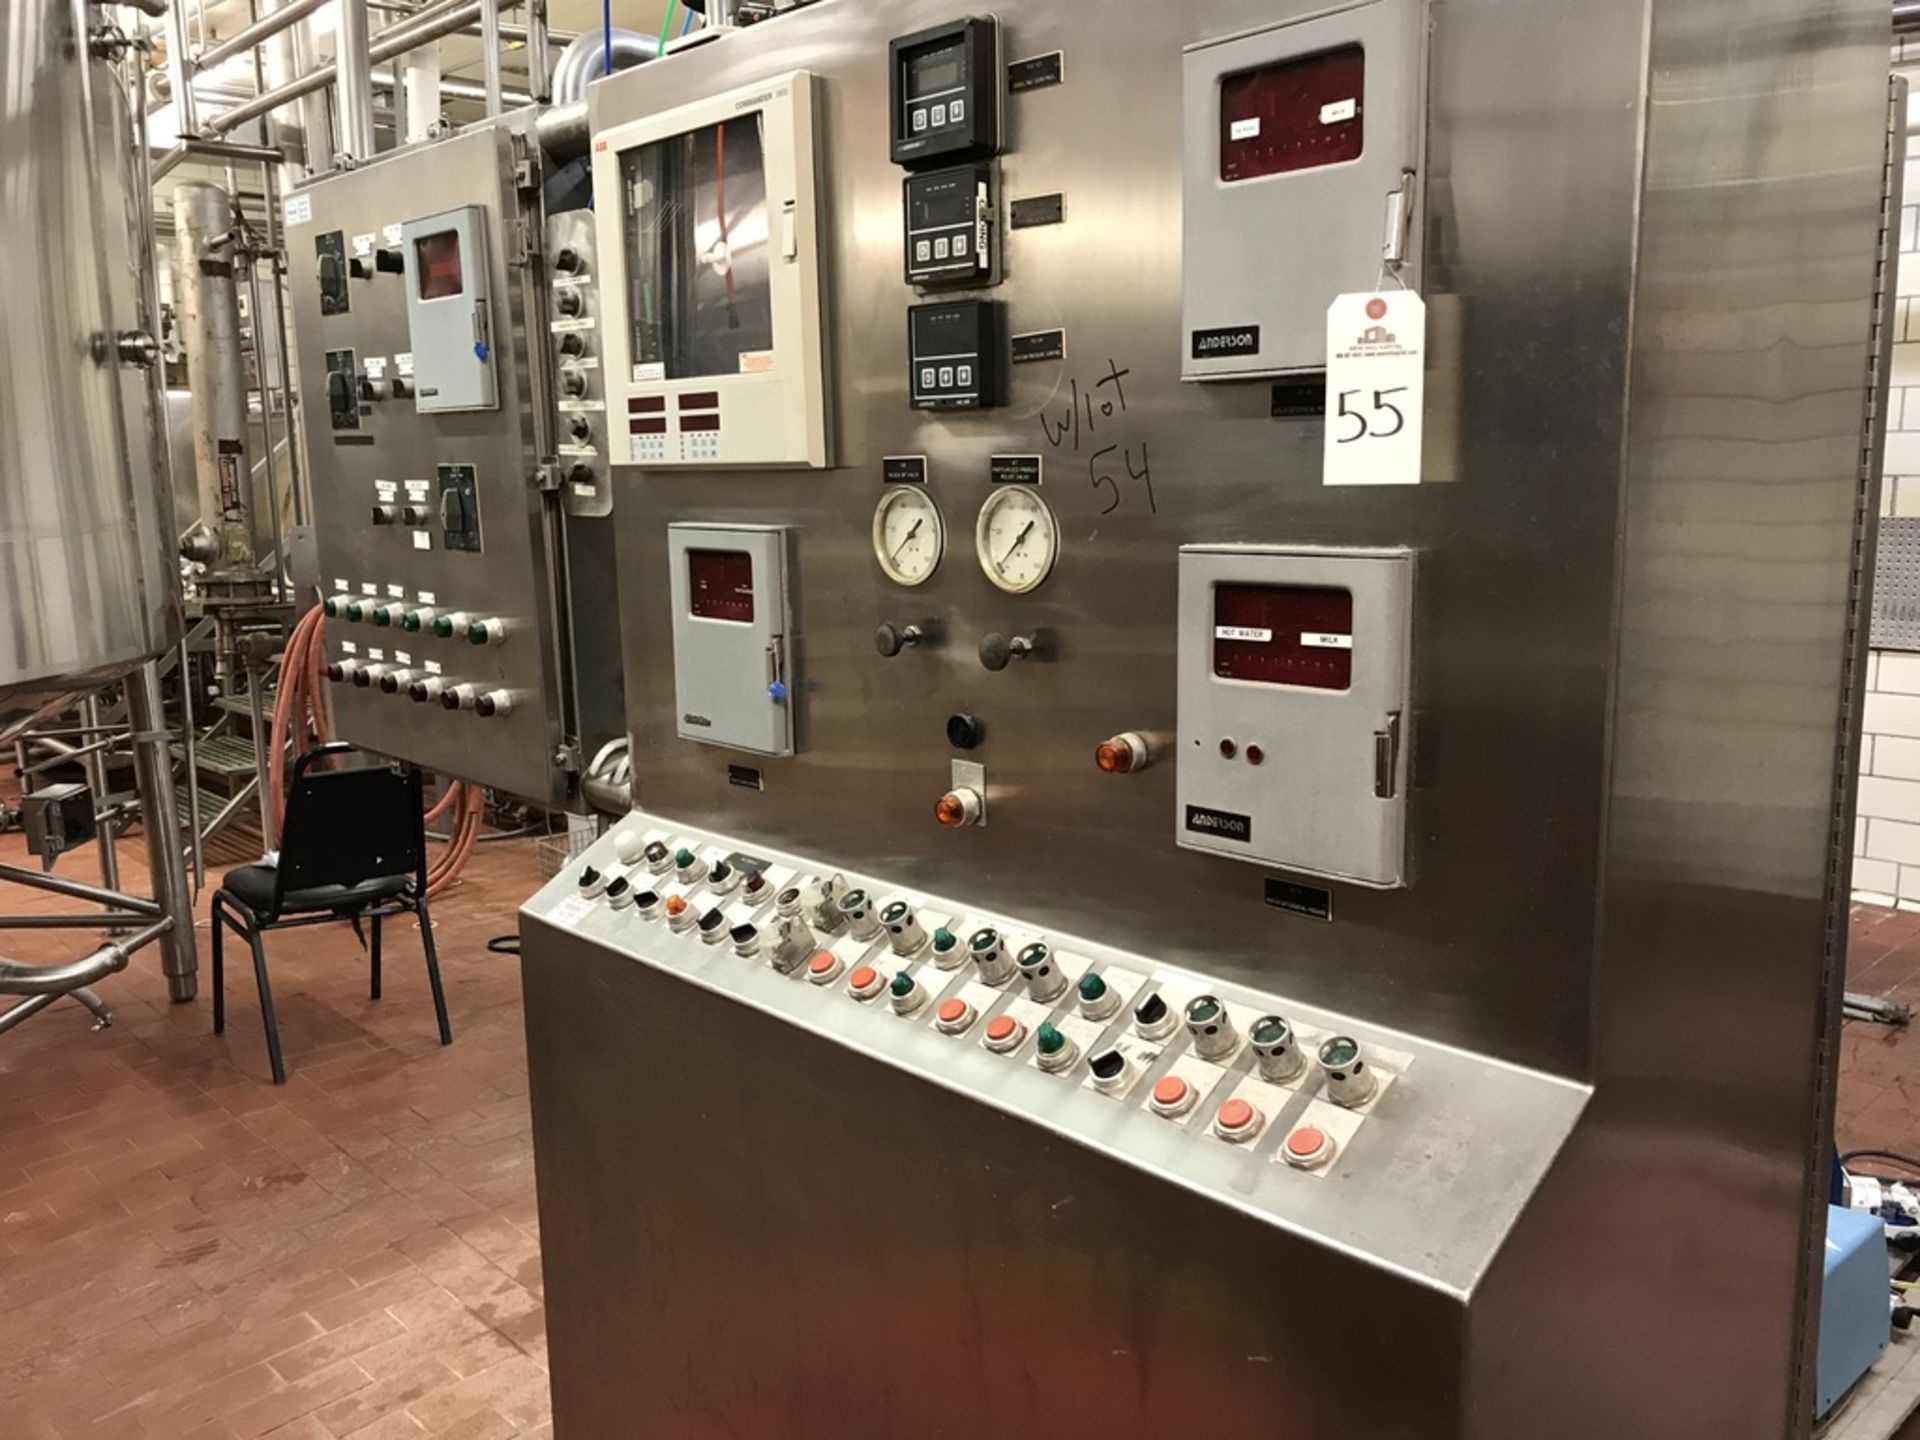 (2) Stainless Steel Control Panels for HTST System, 2.5in Divert Valves | Rig Fee: $550